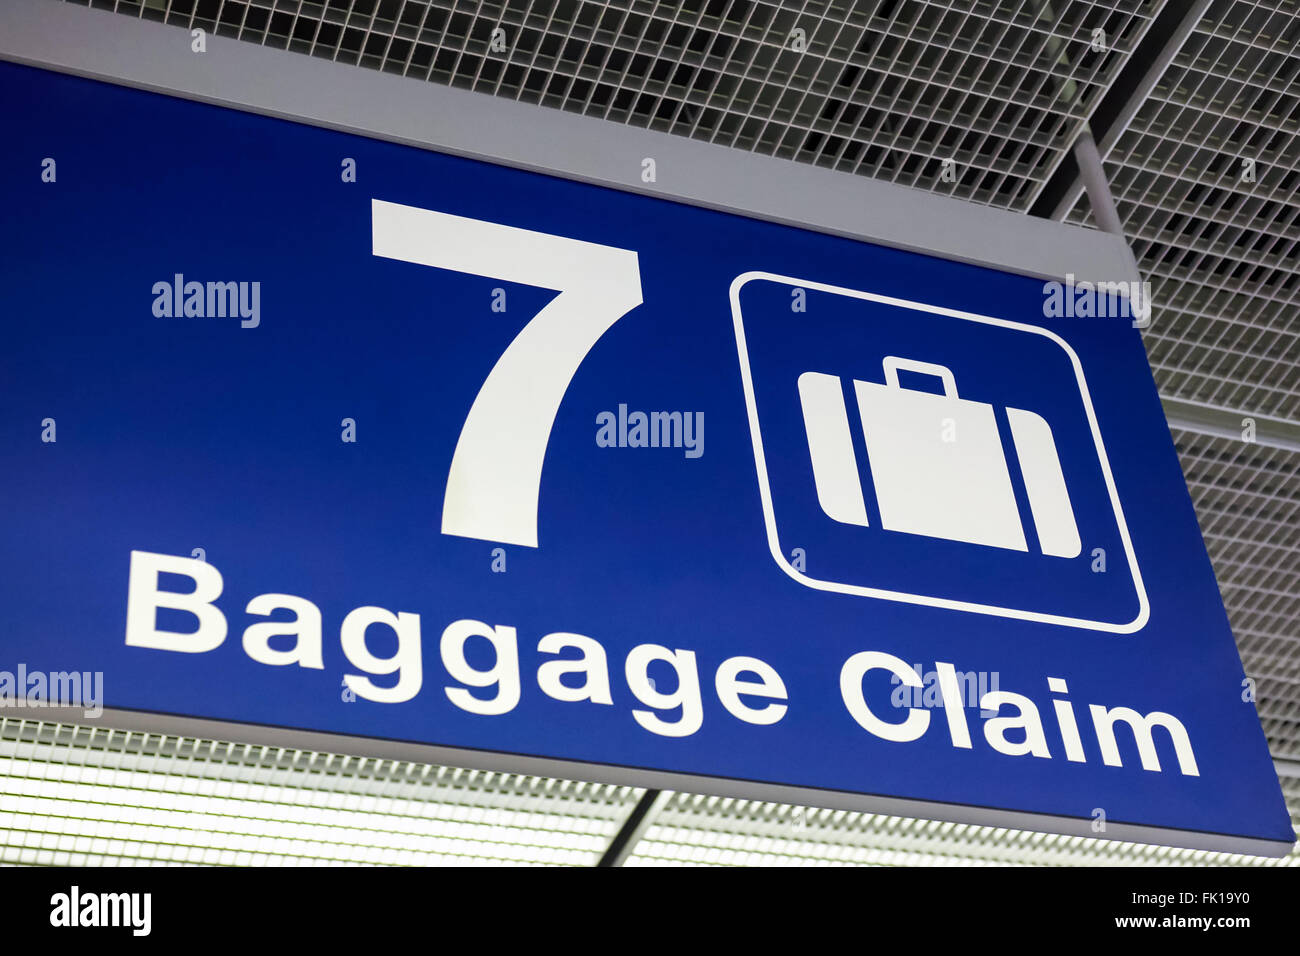 A blue airport baggage claim sign hanging from the ceiling Stock Photo